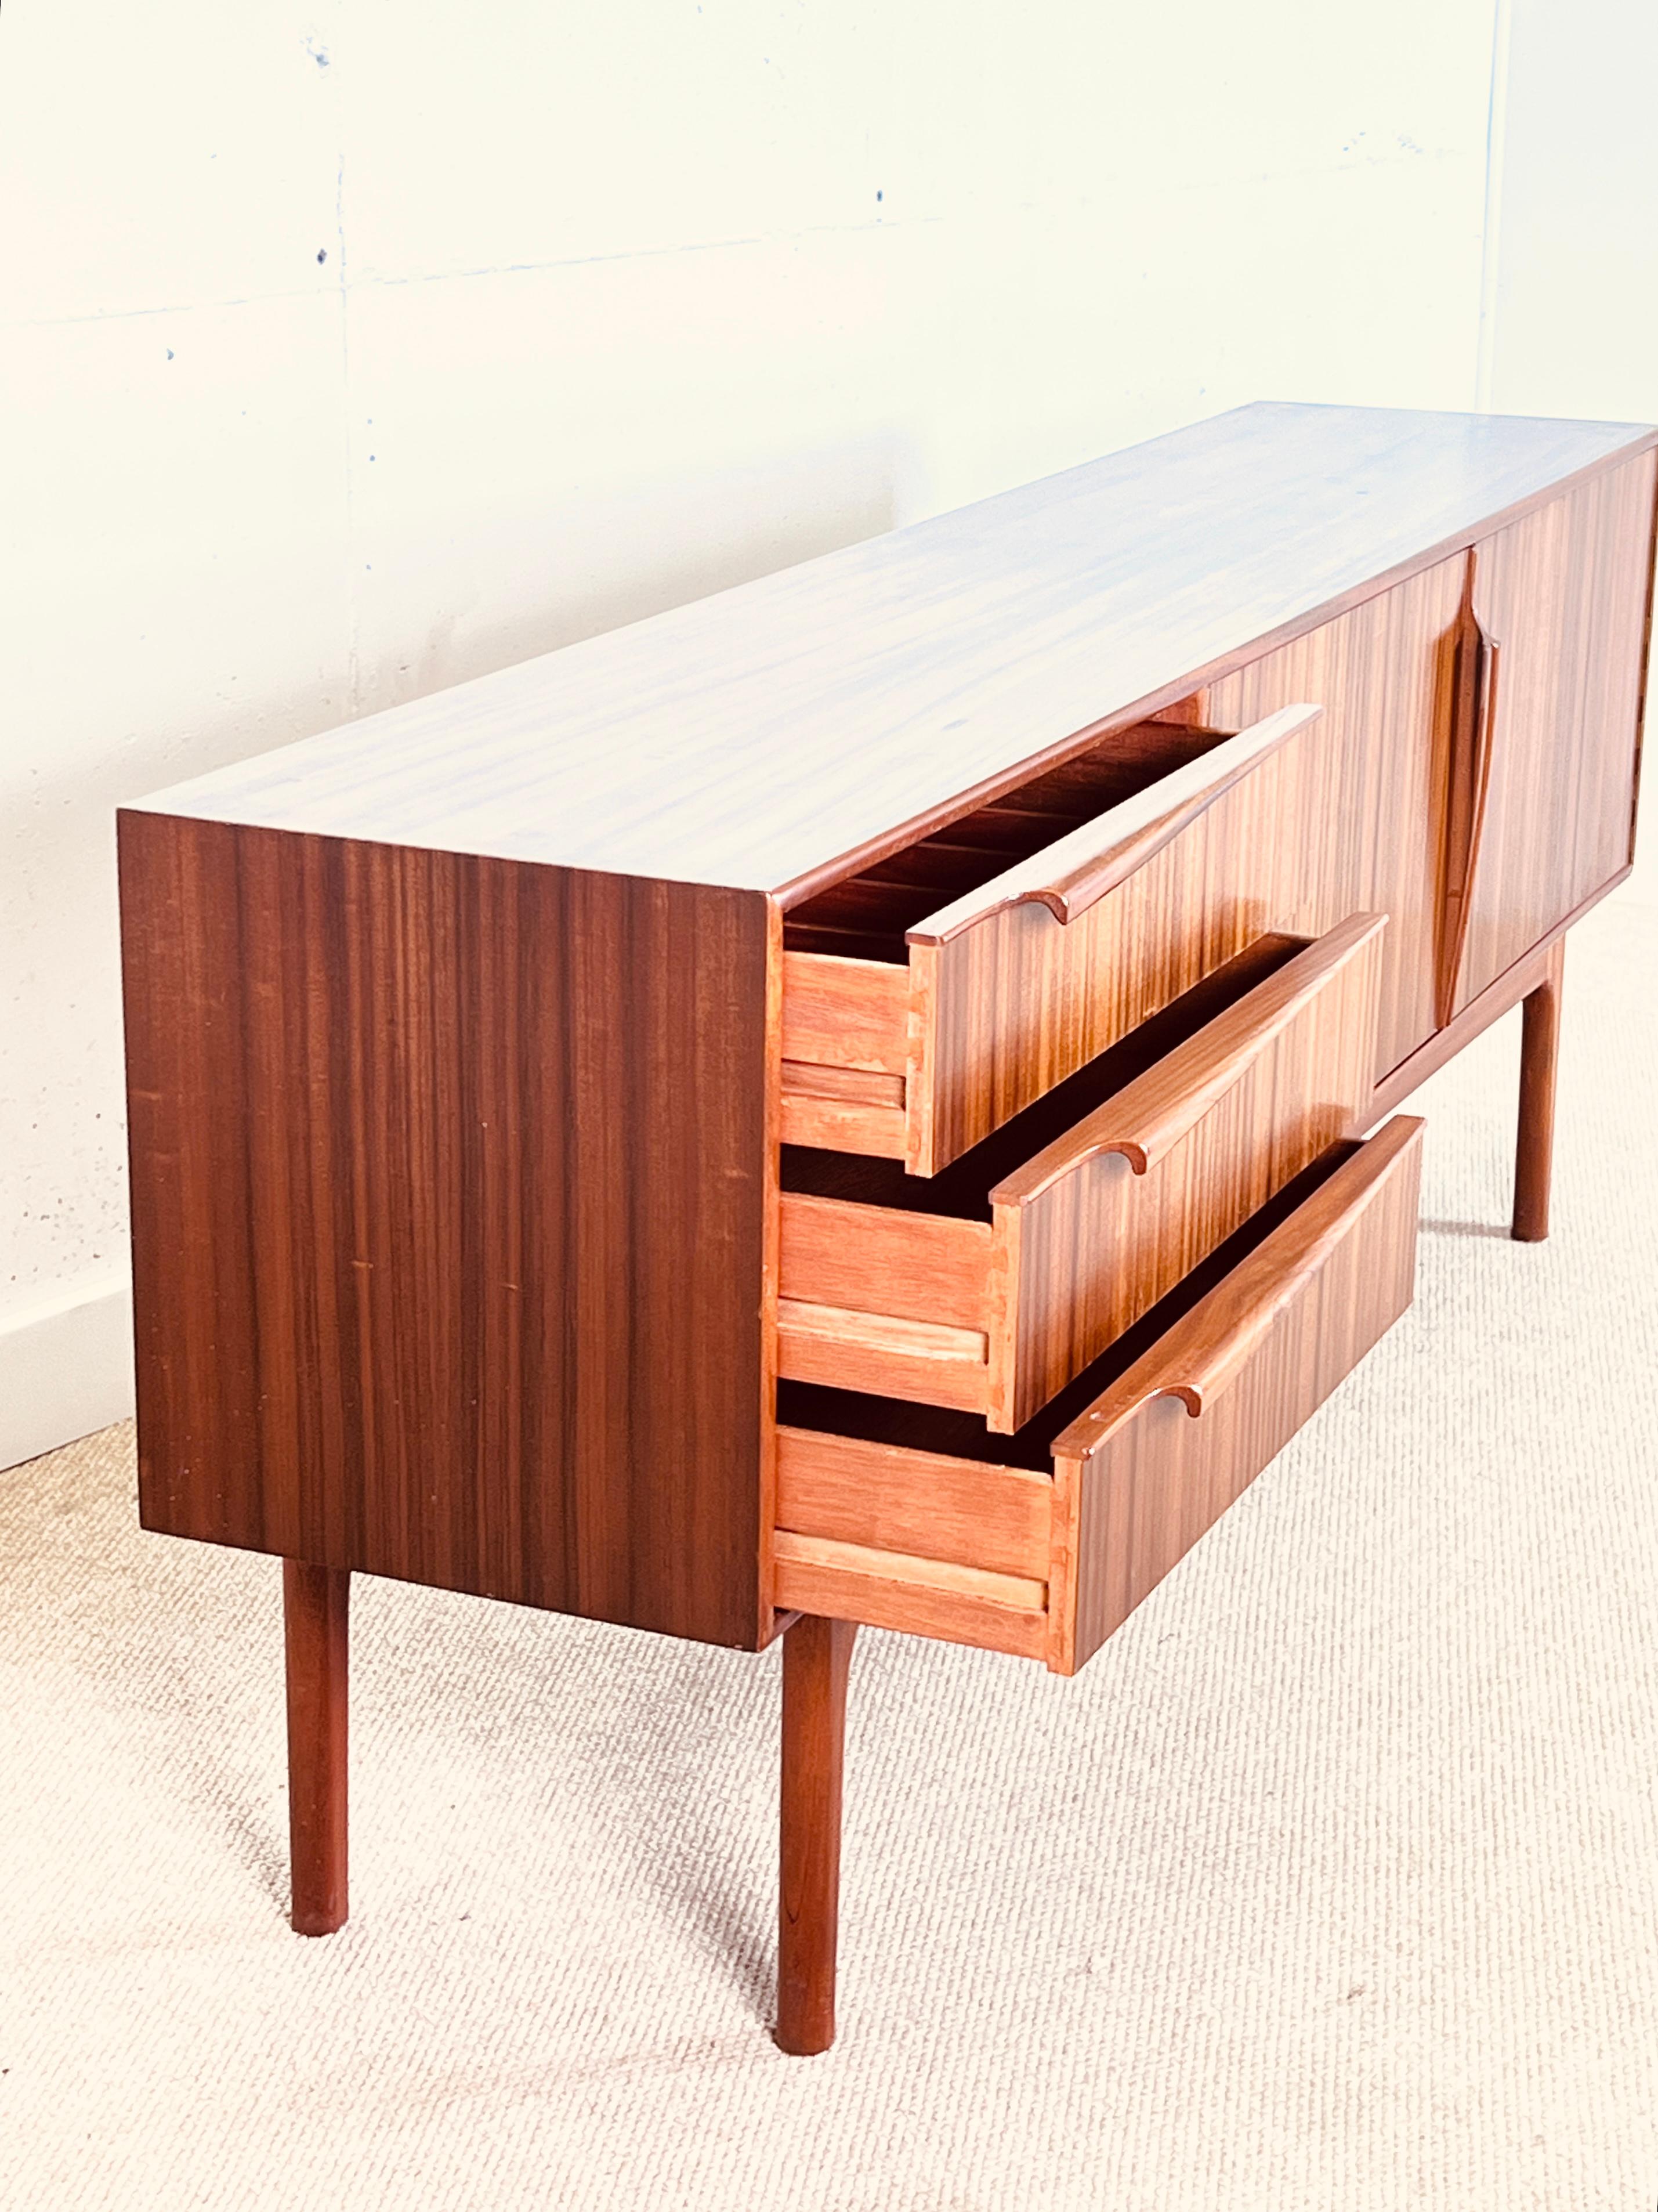 Tom Robertson designed this beautiful sideboard in Scotland in the early ‘70s for the well-known cabinet maker A.H. McIntosh.

The sideboard has two sections, one bank of three drawers, the top one lined up for the cutlery, and an, on its right, a